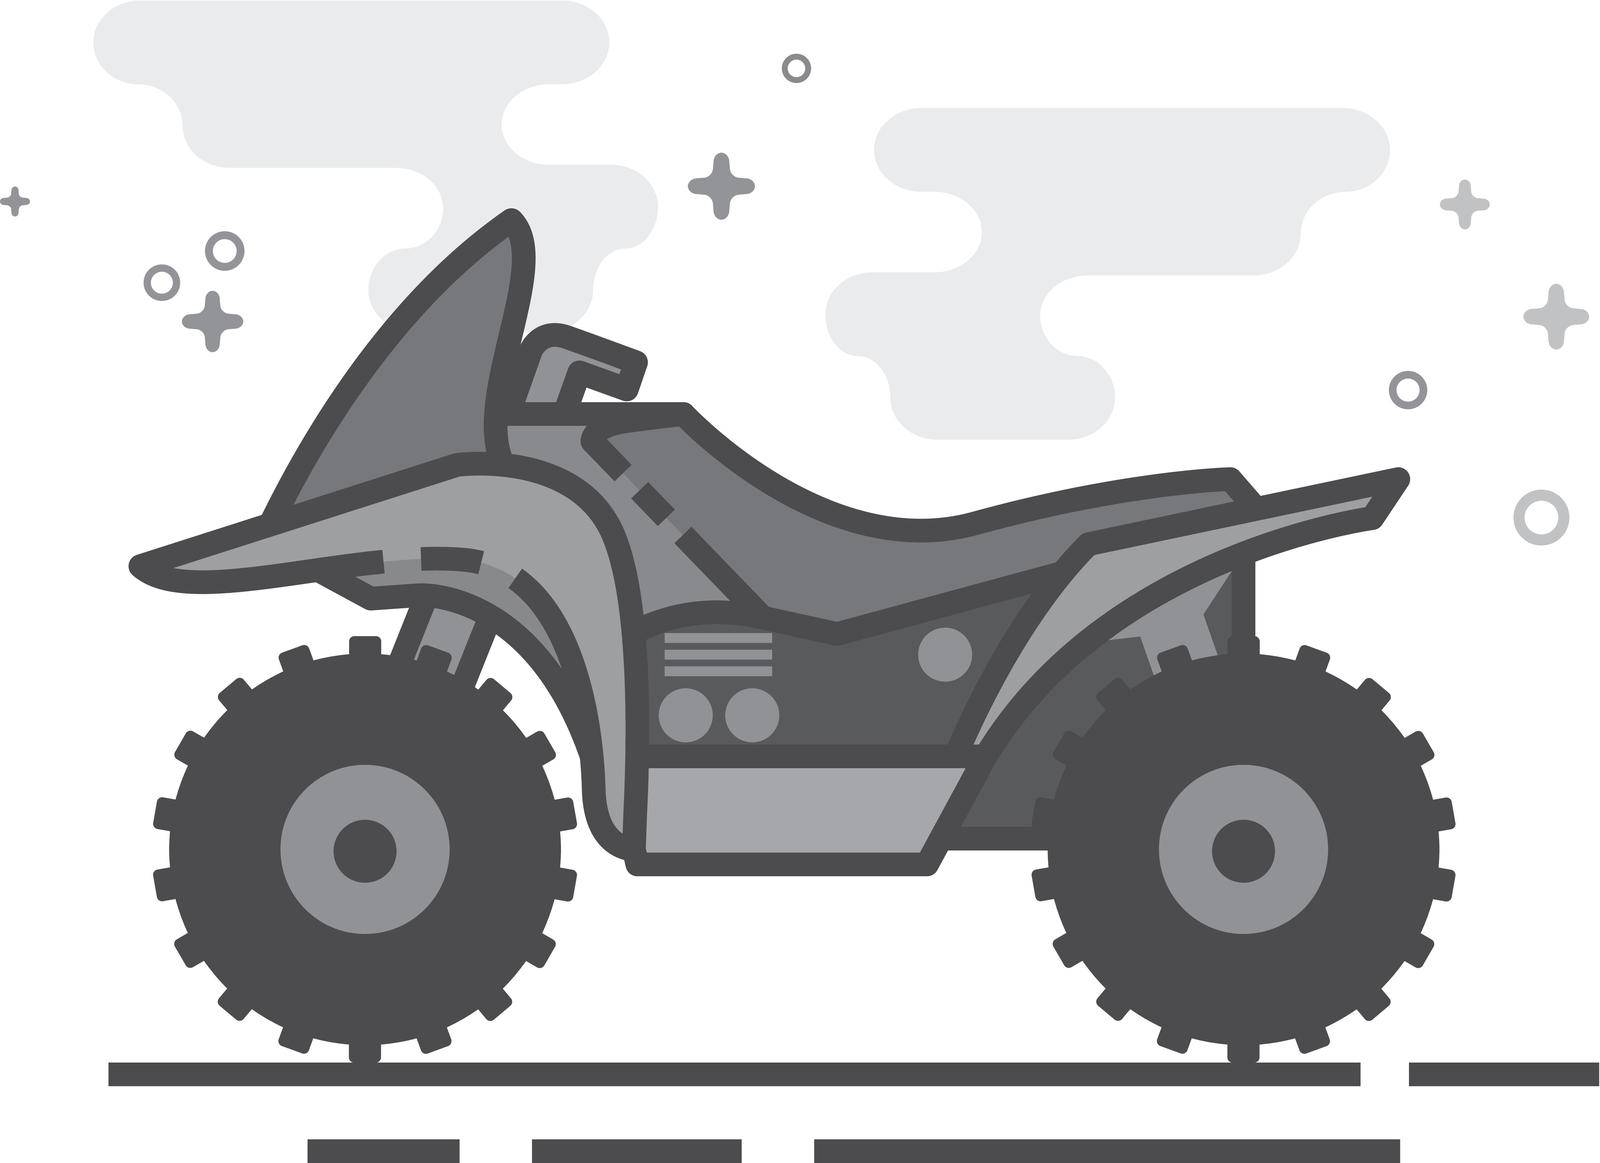 All terrain vehicle icon in flat outlined grayscale style. Vector illustration.